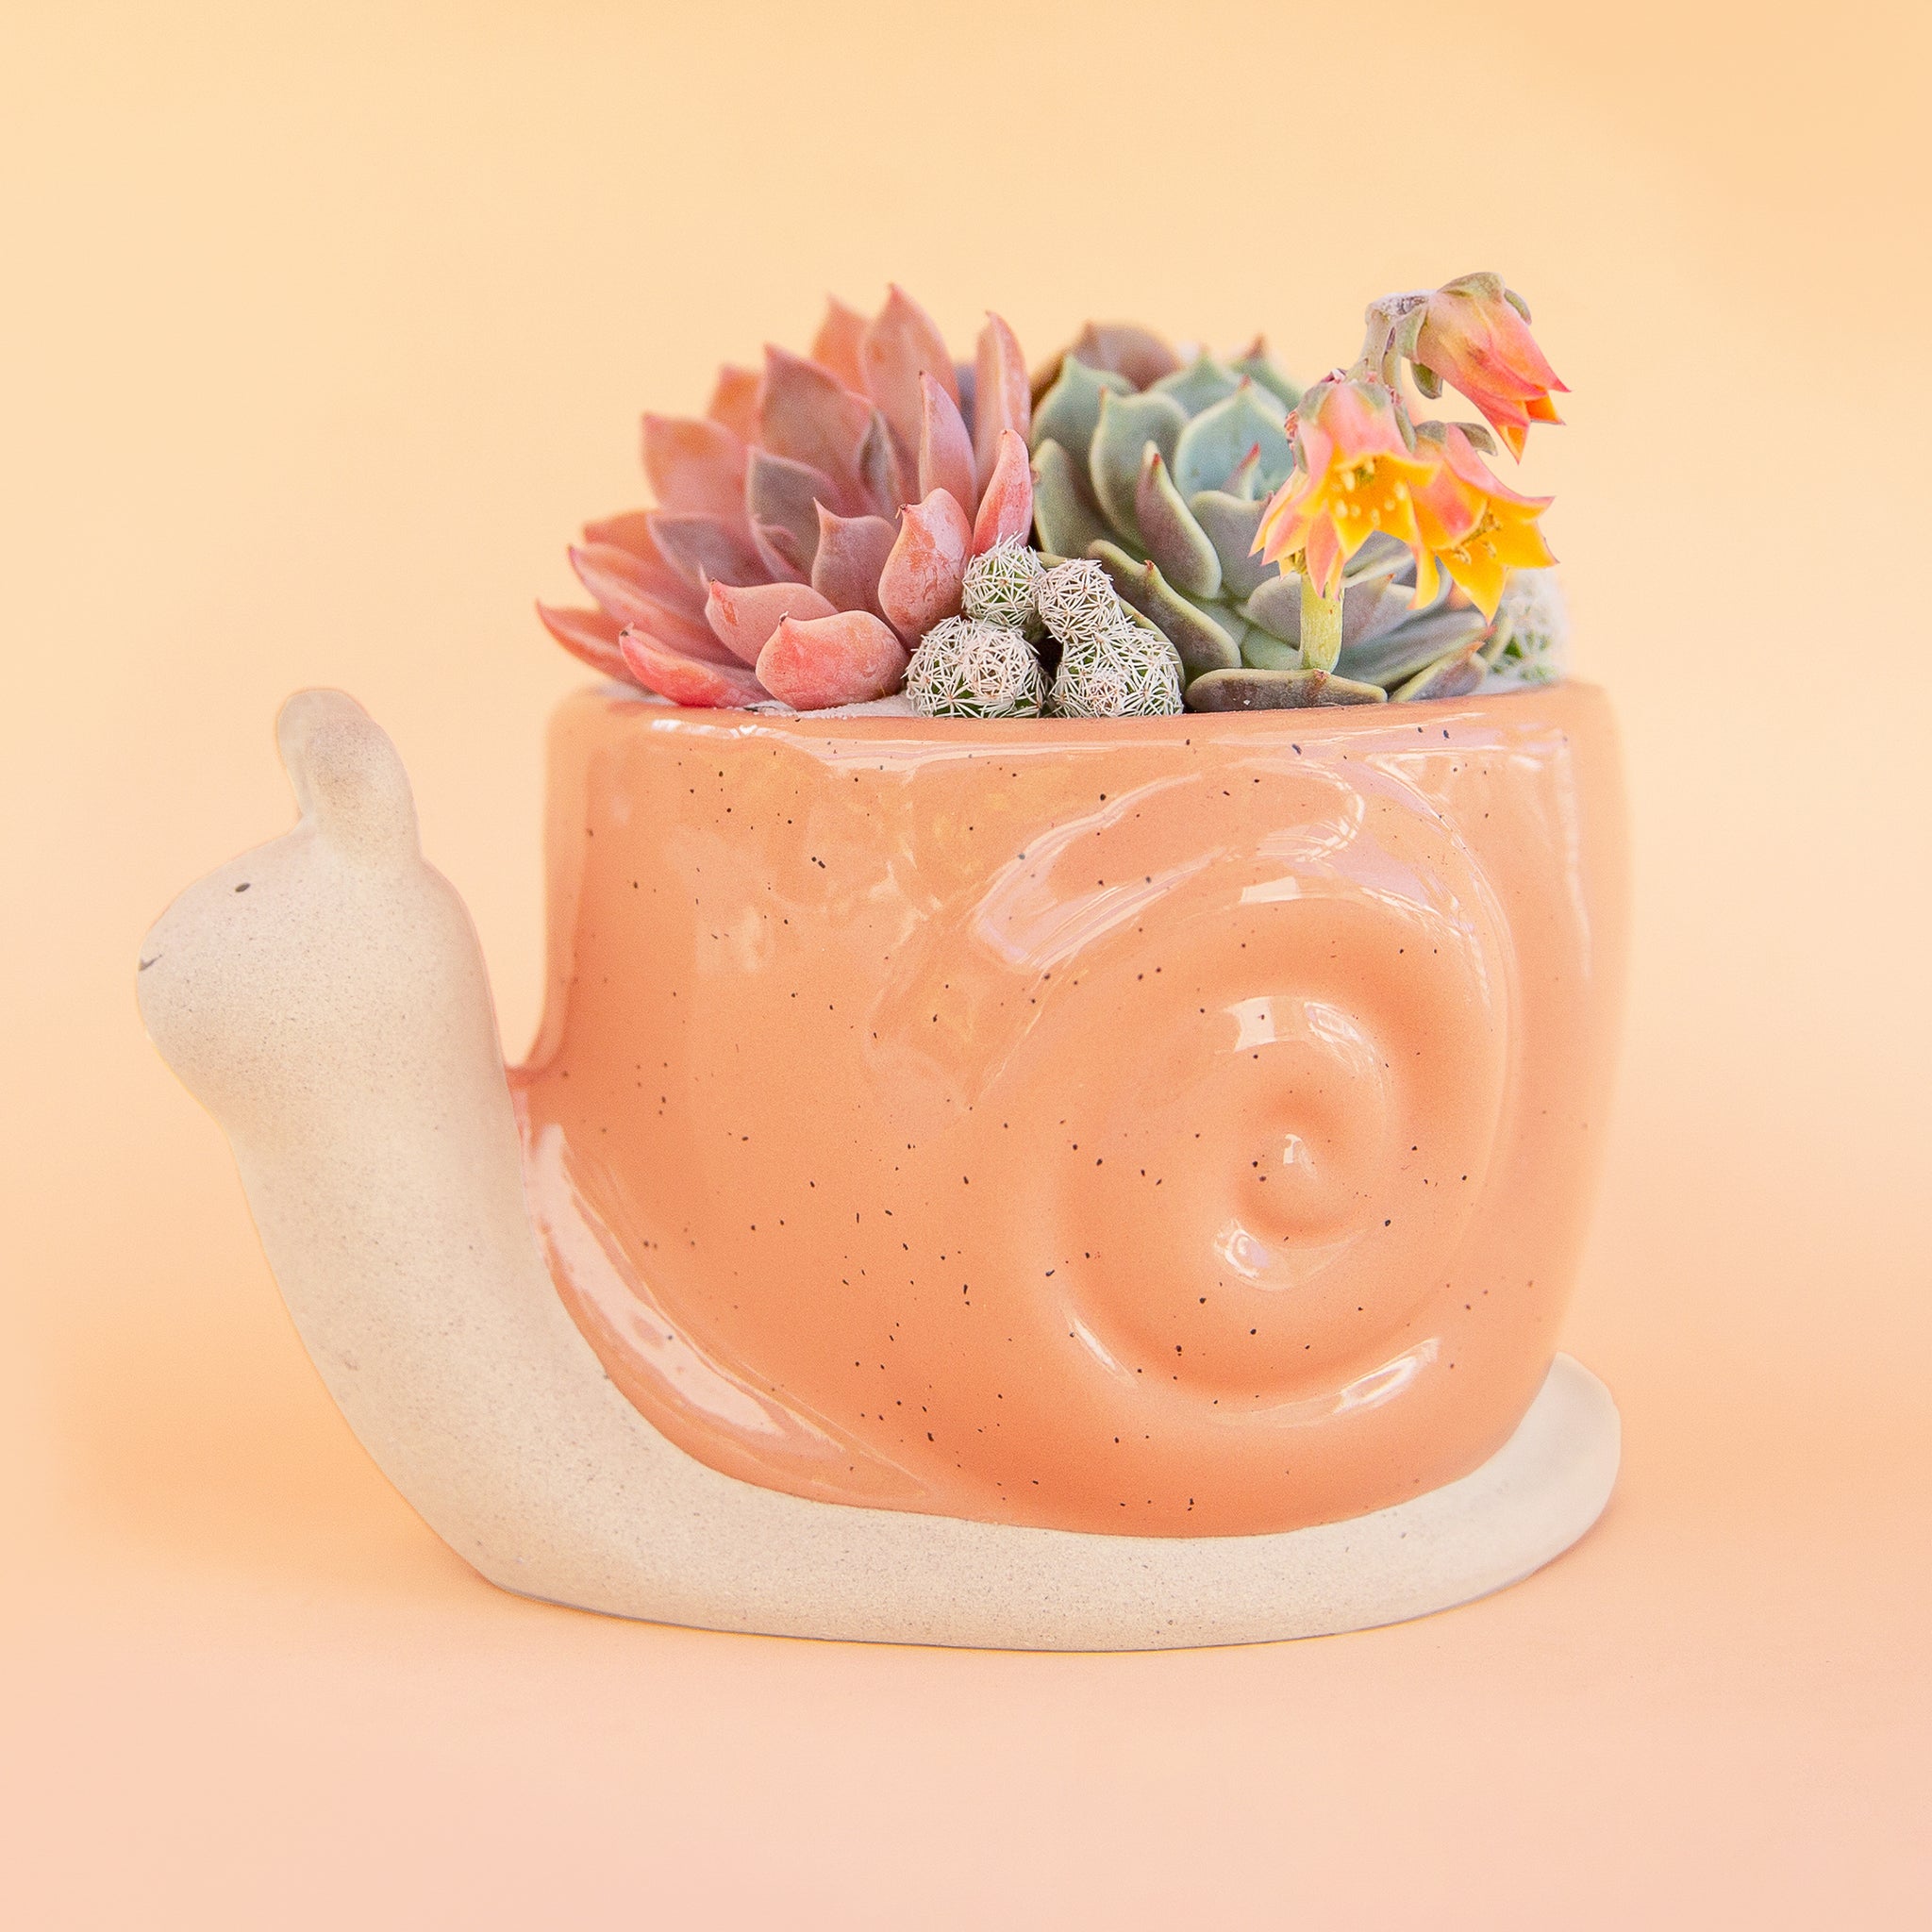 On a peachy background is an orange snail shaped planter filled with a cactus and succulent arrangement